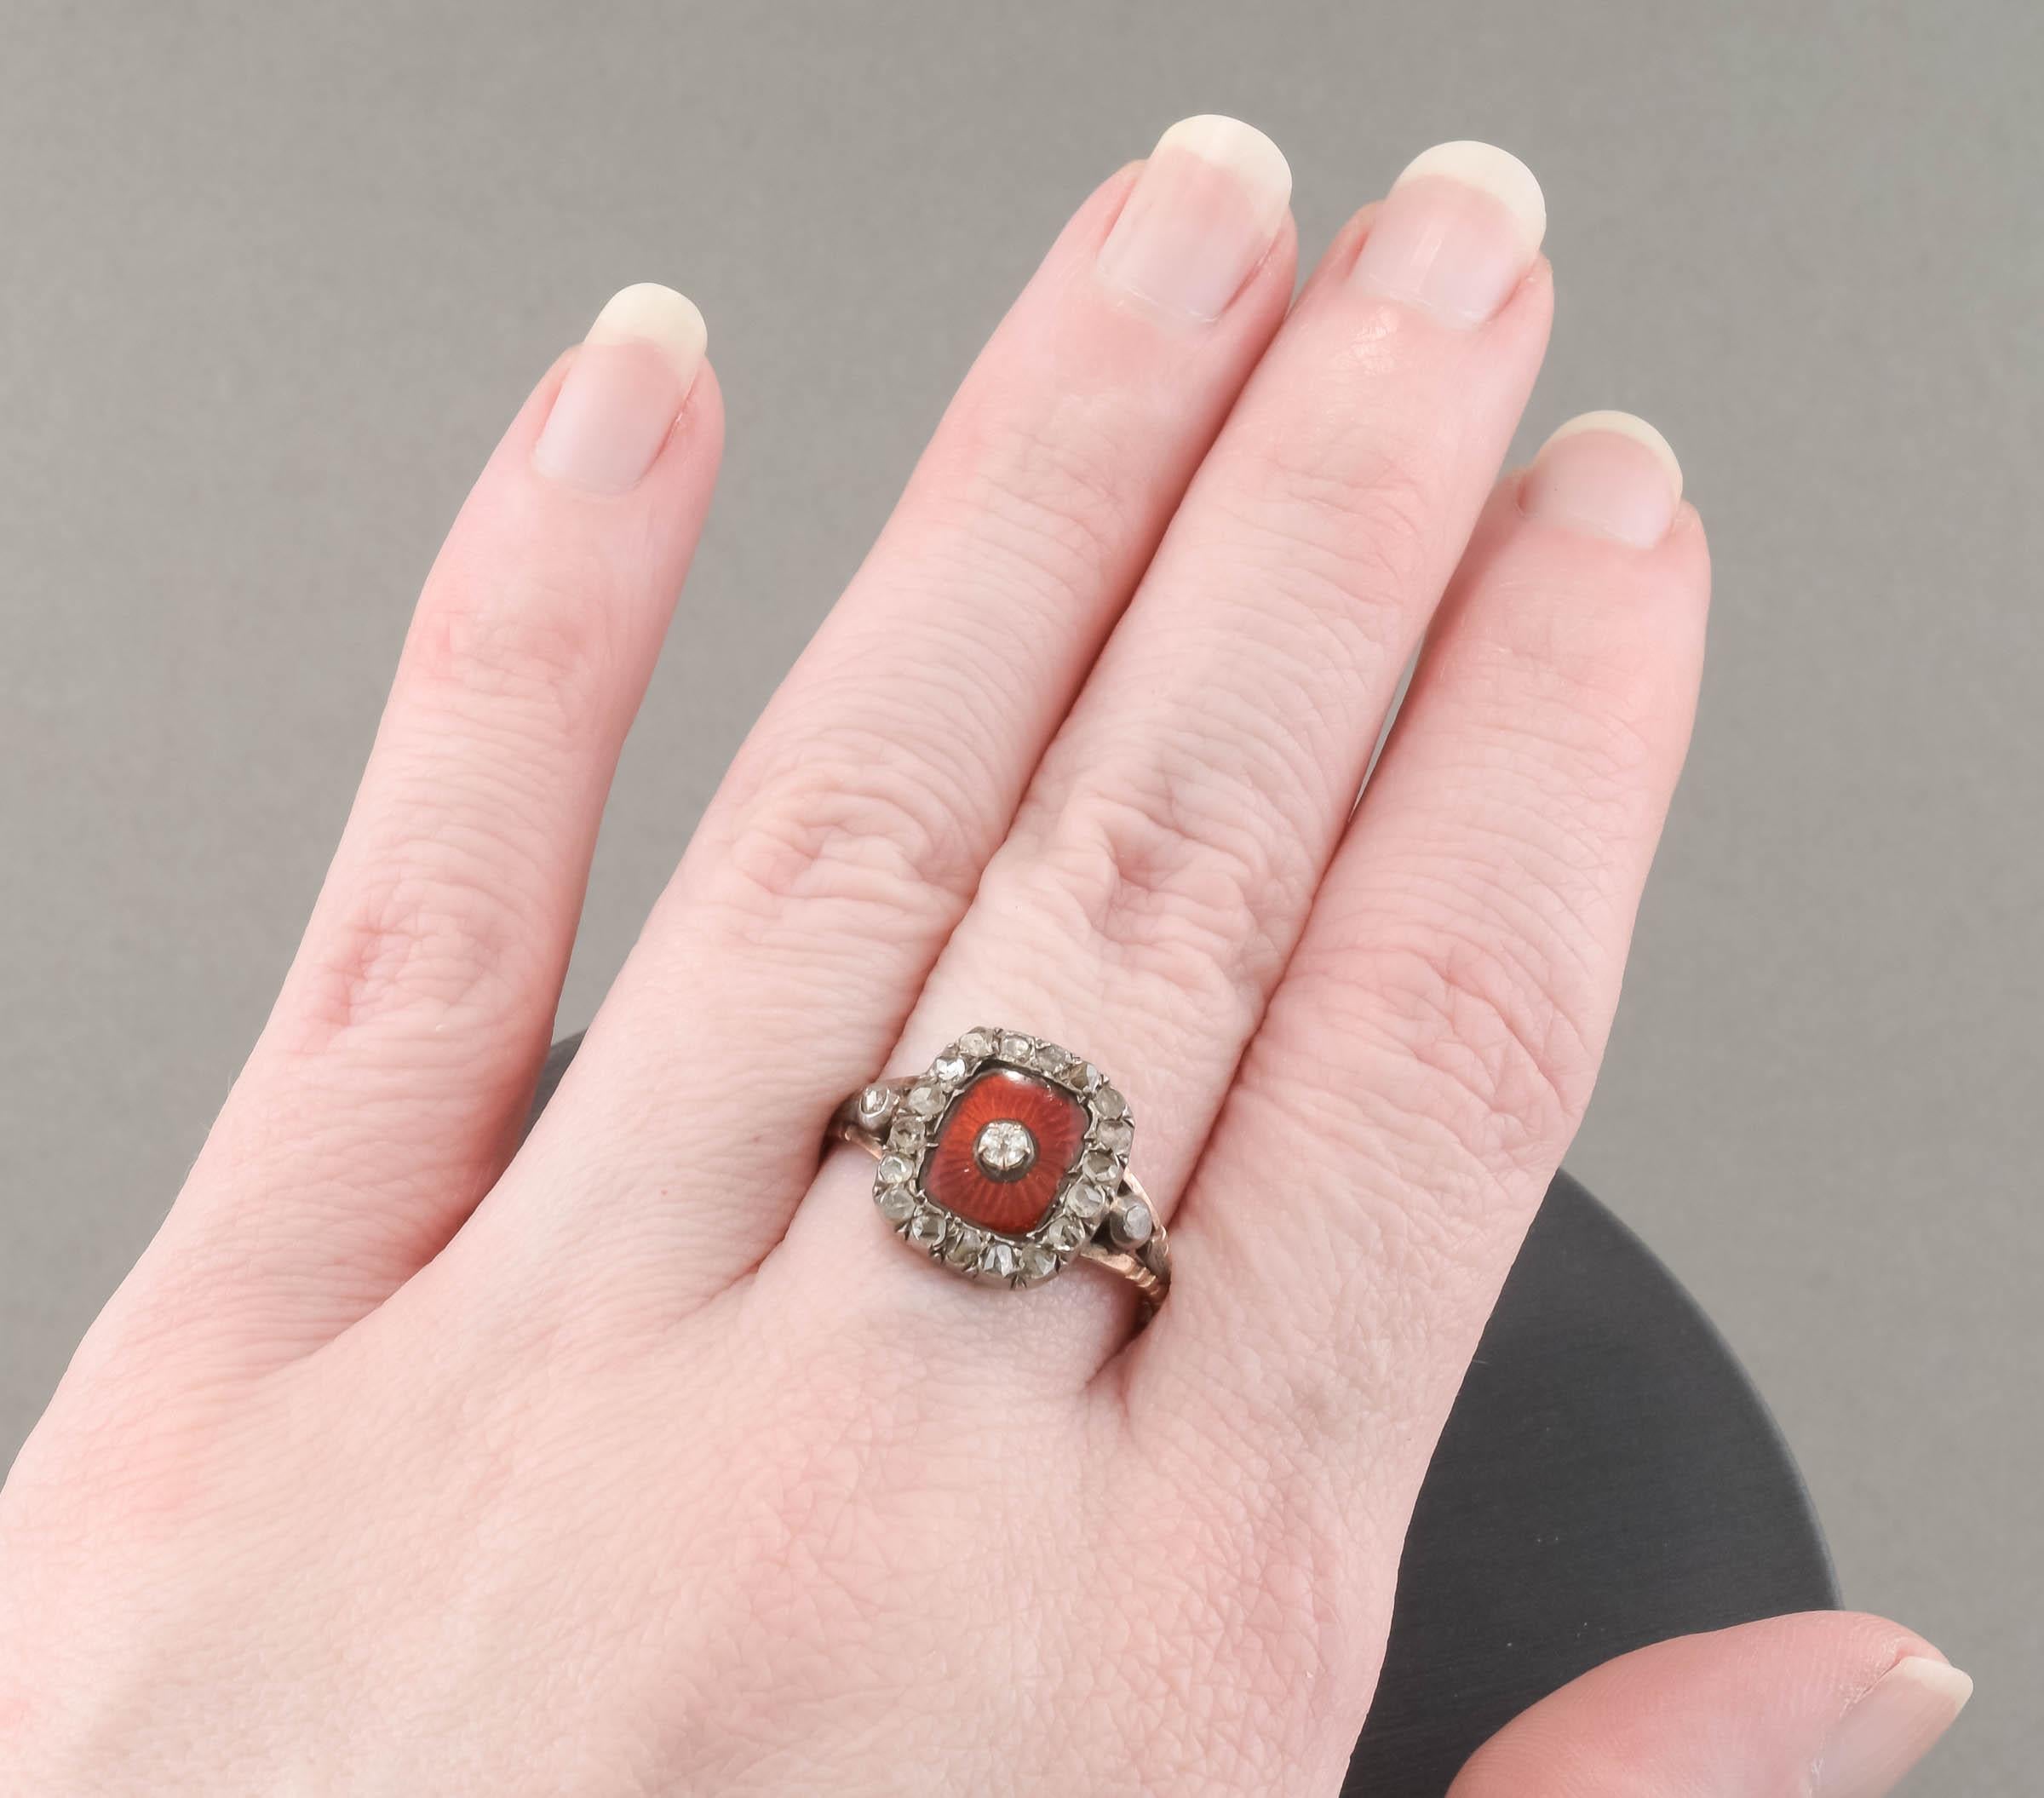 Antique Diamond & Scarlet Guilloche Enamel Ring with Provenance For Sale 2